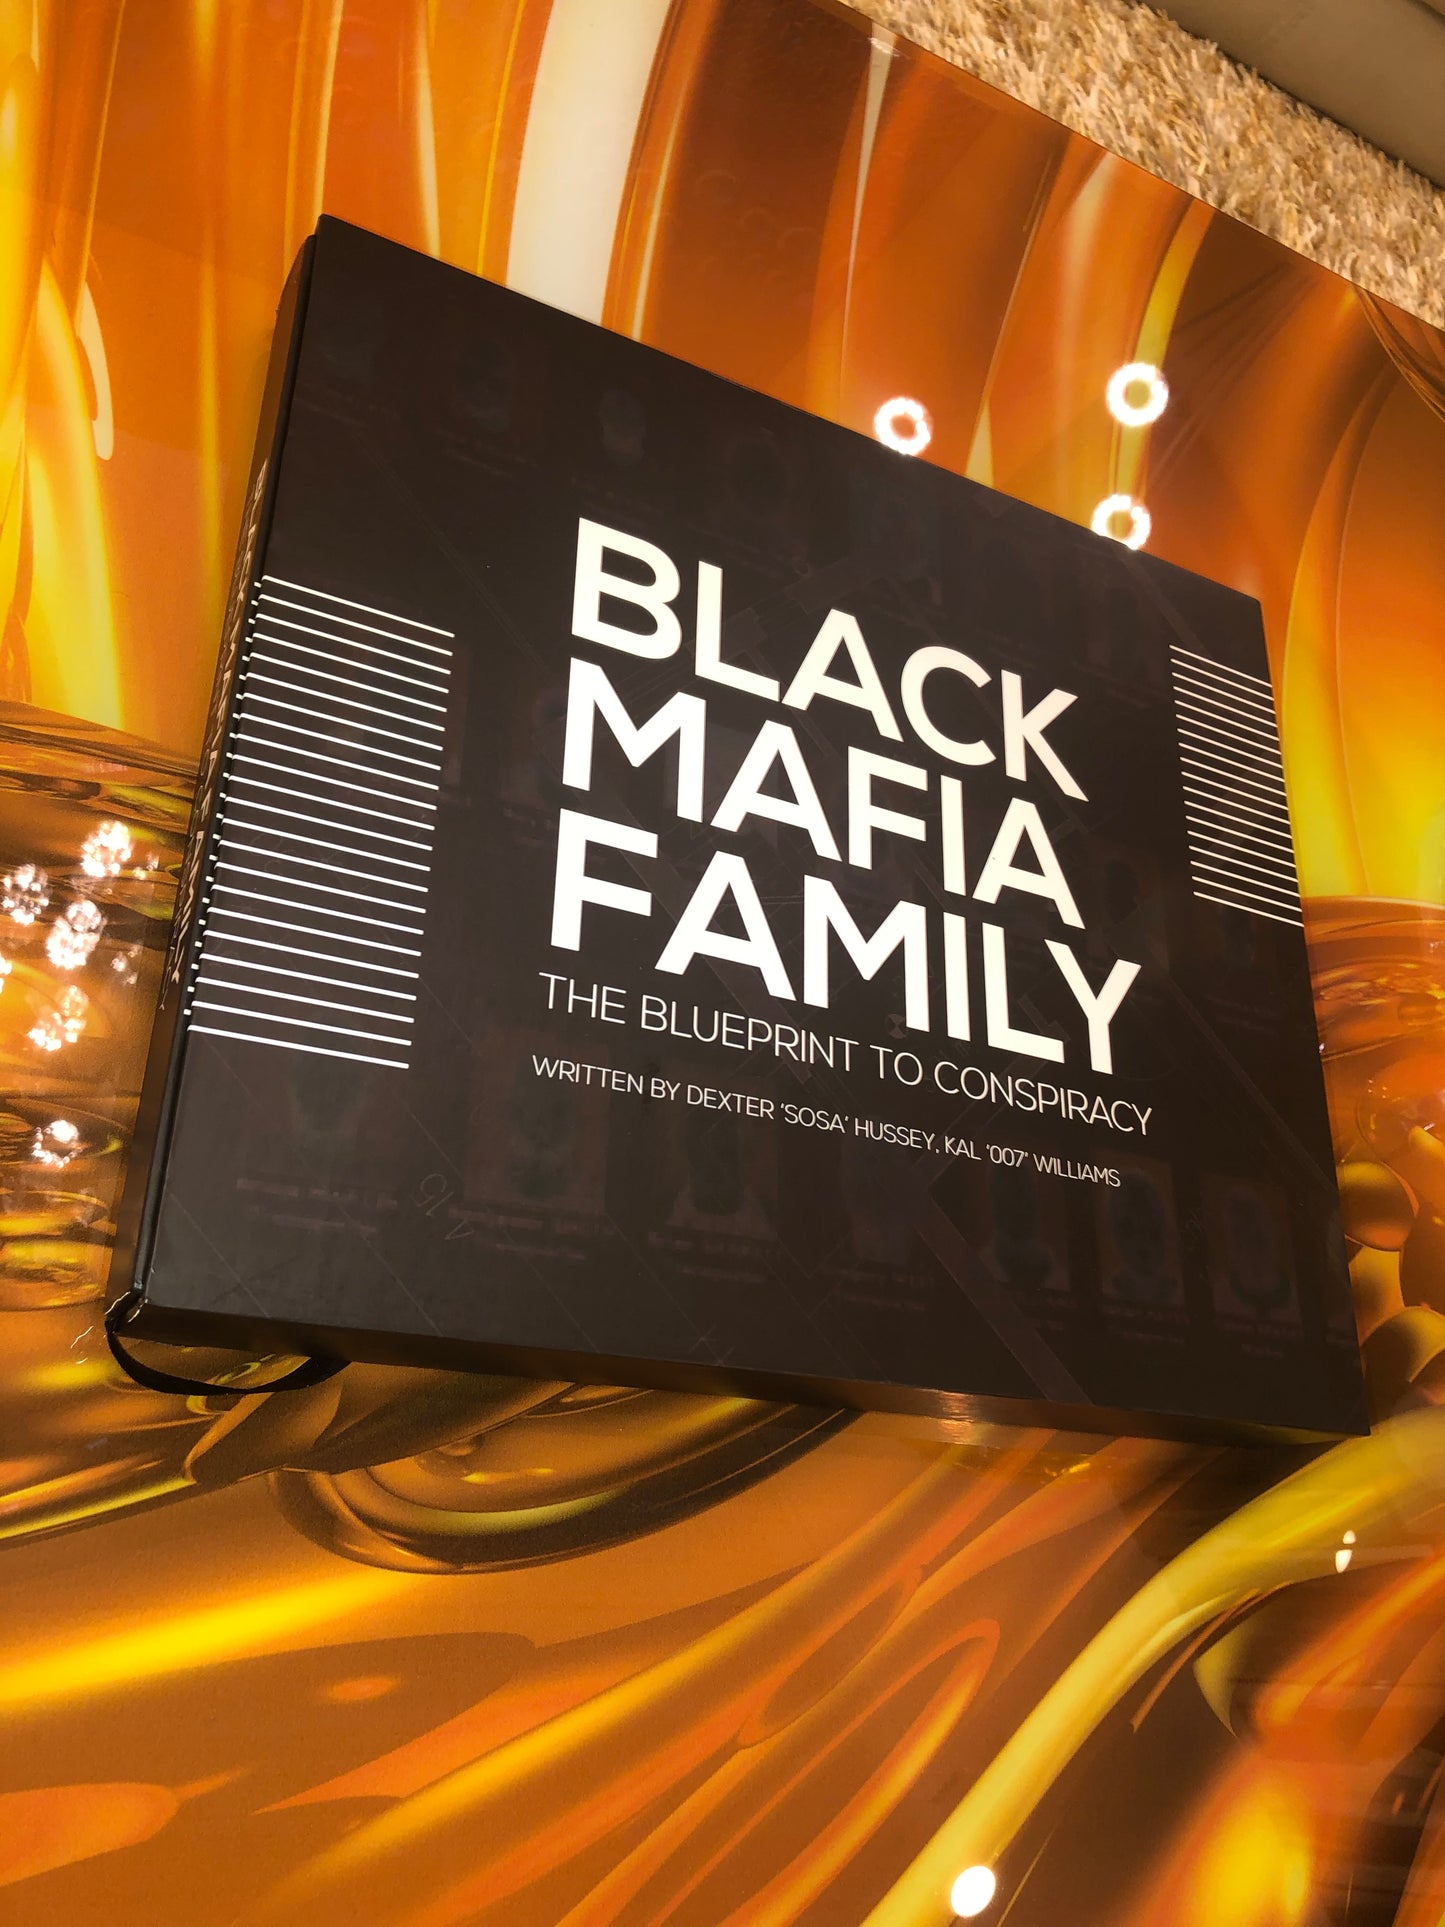 BMF BLACK MAFIA FAMILY "The Blueprint to Conspiracy" Collectors Edition Volume 1